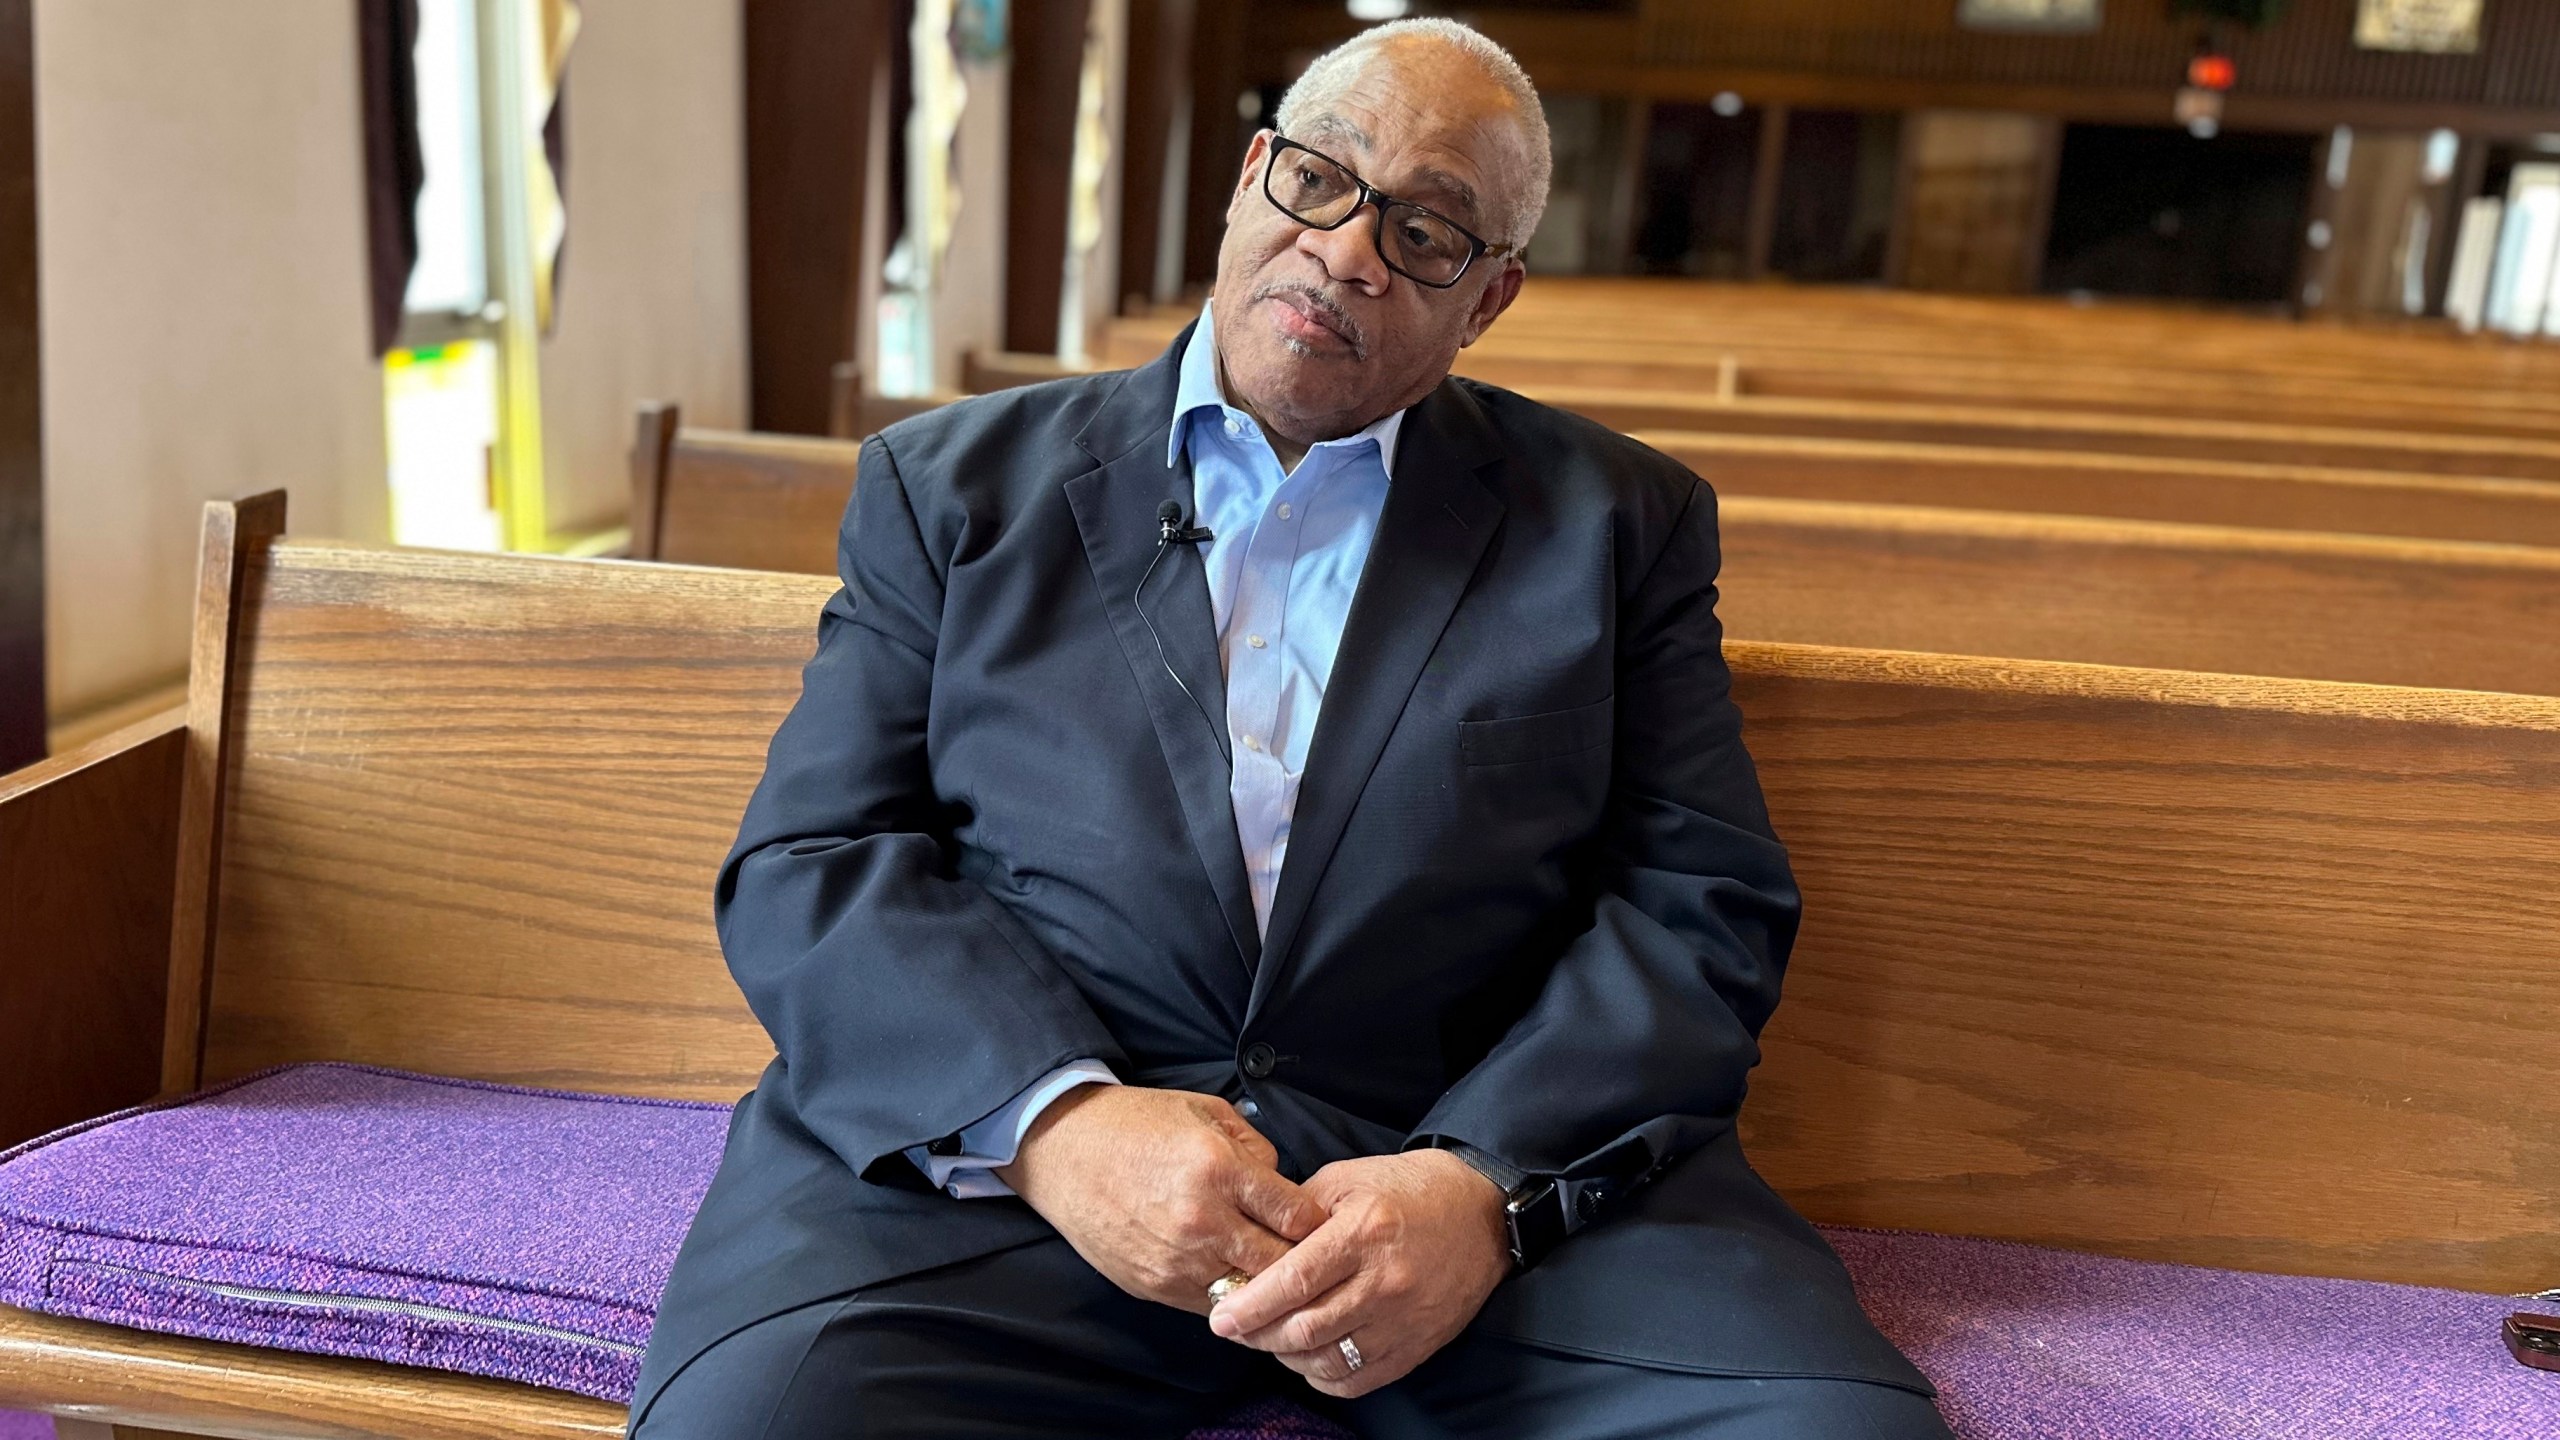 Bishop Hurley Coleman Jr. sits in his church on Tuesday, March 12, 2024, in Saginaw, Mich. President Joe Biden is expected to make a campaign visit to Saginaw on Thursday, and Coleman says "if there is a place in America that he can tell his story to a people that need to hear it, Saginaw is that typical place." (AP Photo/Mike Householder)